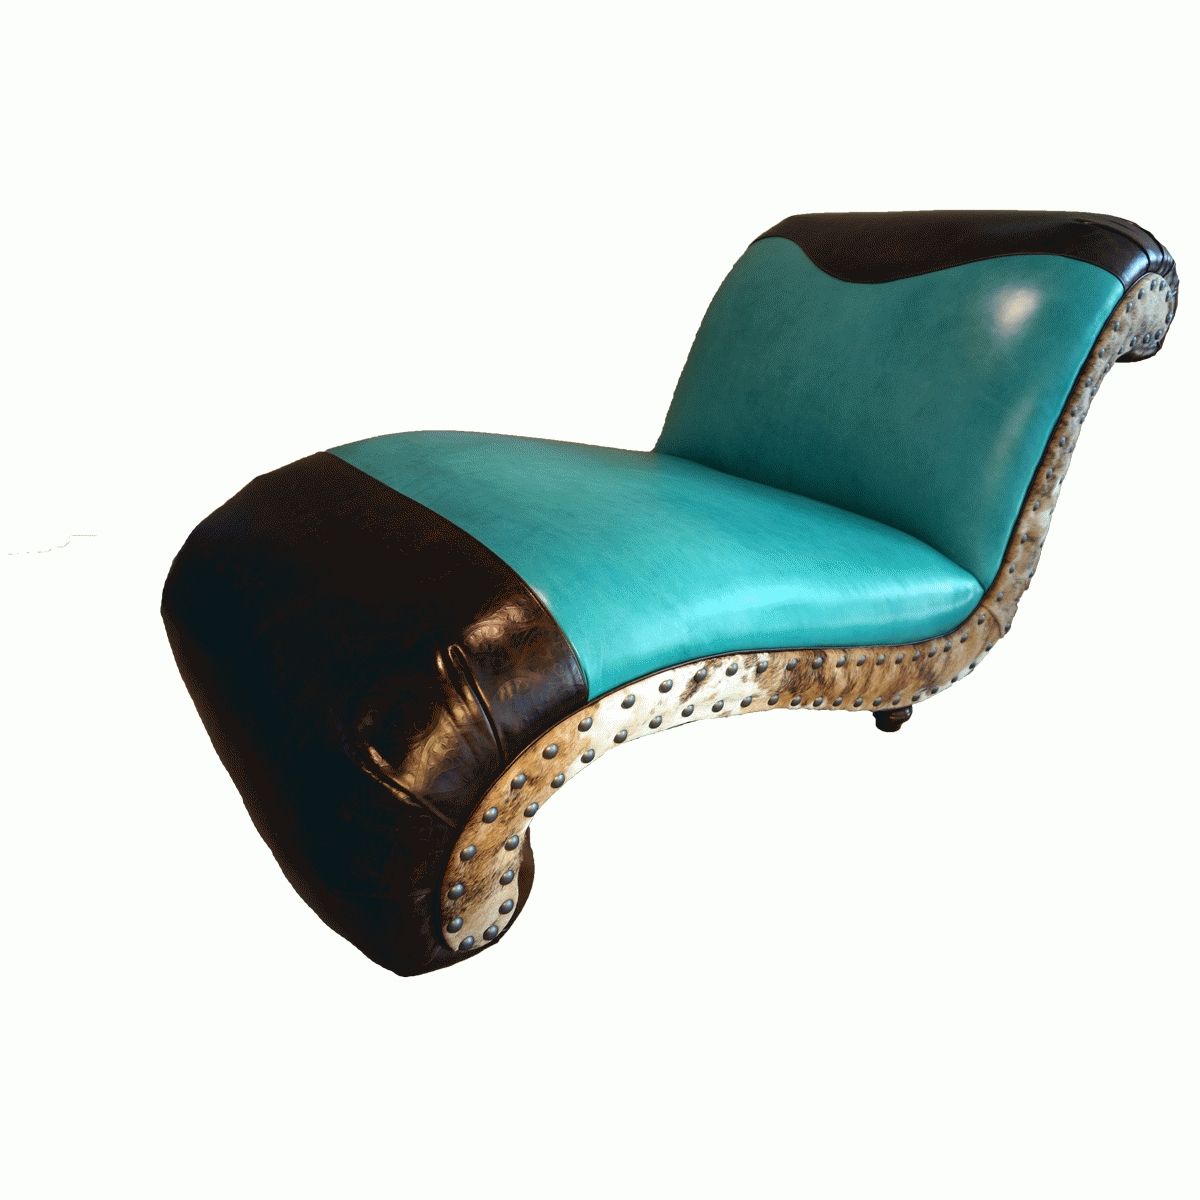 Albuquerque Turquoise Chaise Lounge Within Most Up To Date Teal Chaise Lounges (View 2 of 15)